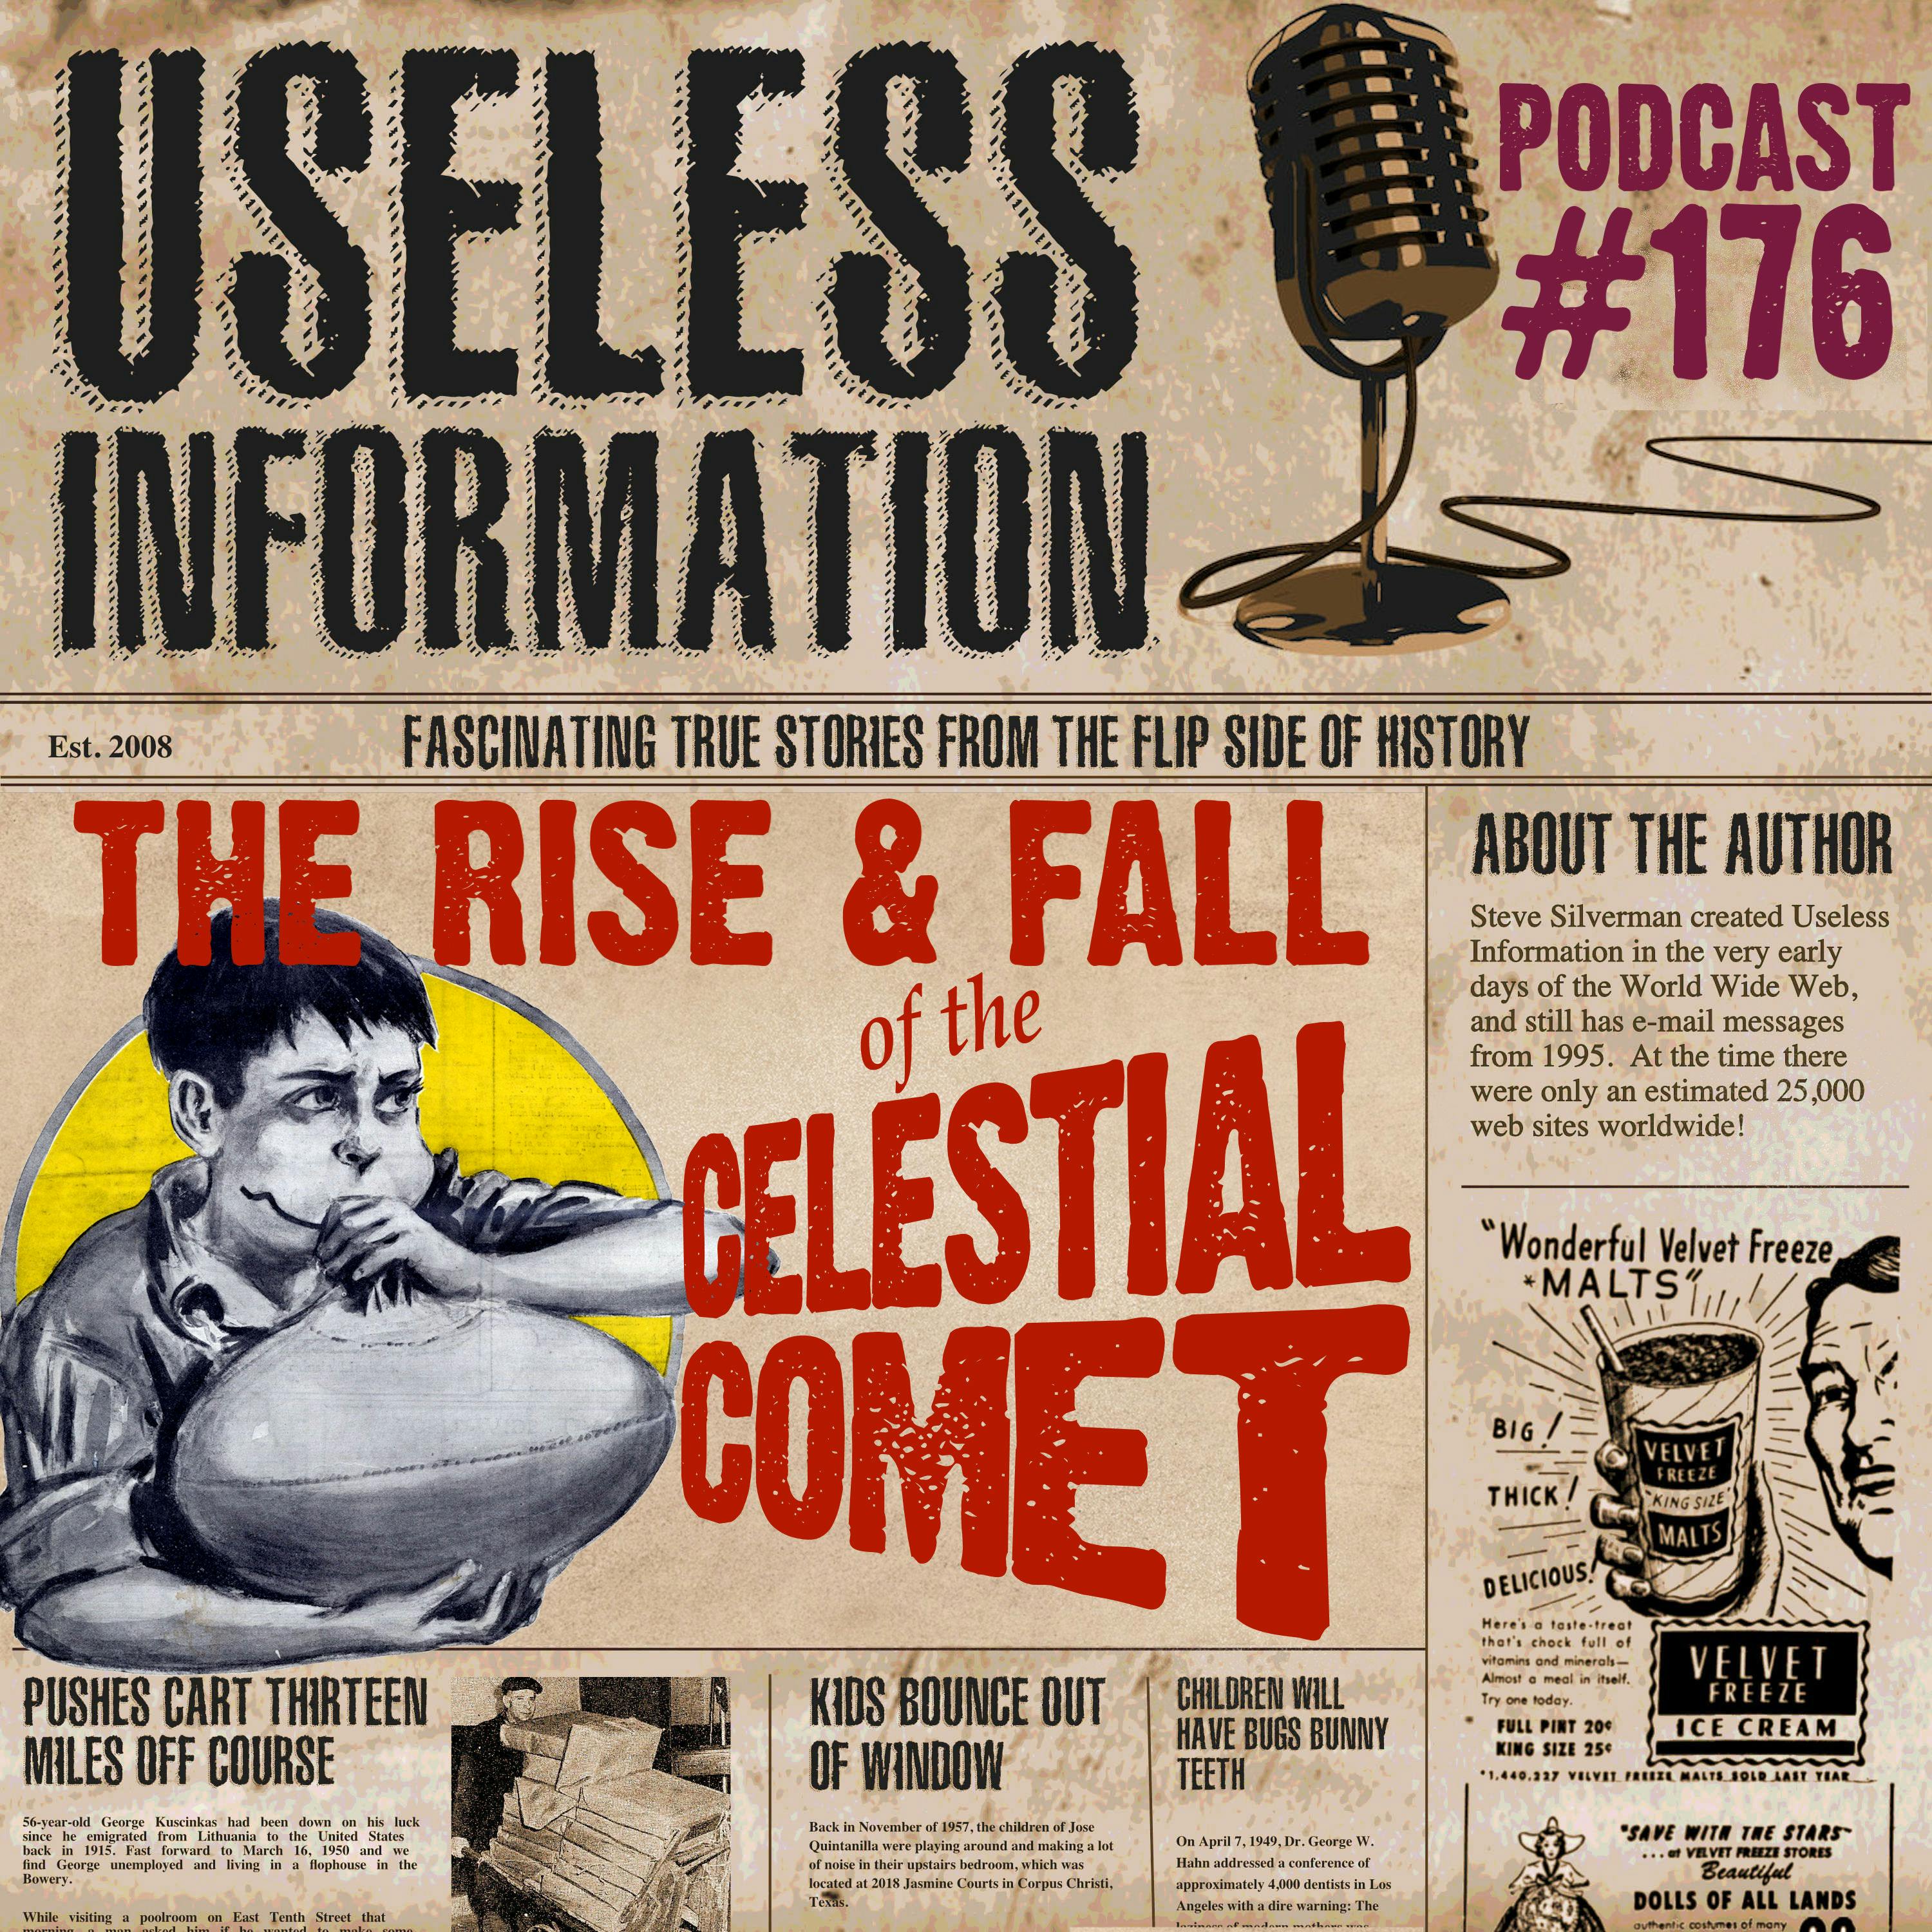 The Rise & Fall of the Celestial Comet - UI #176